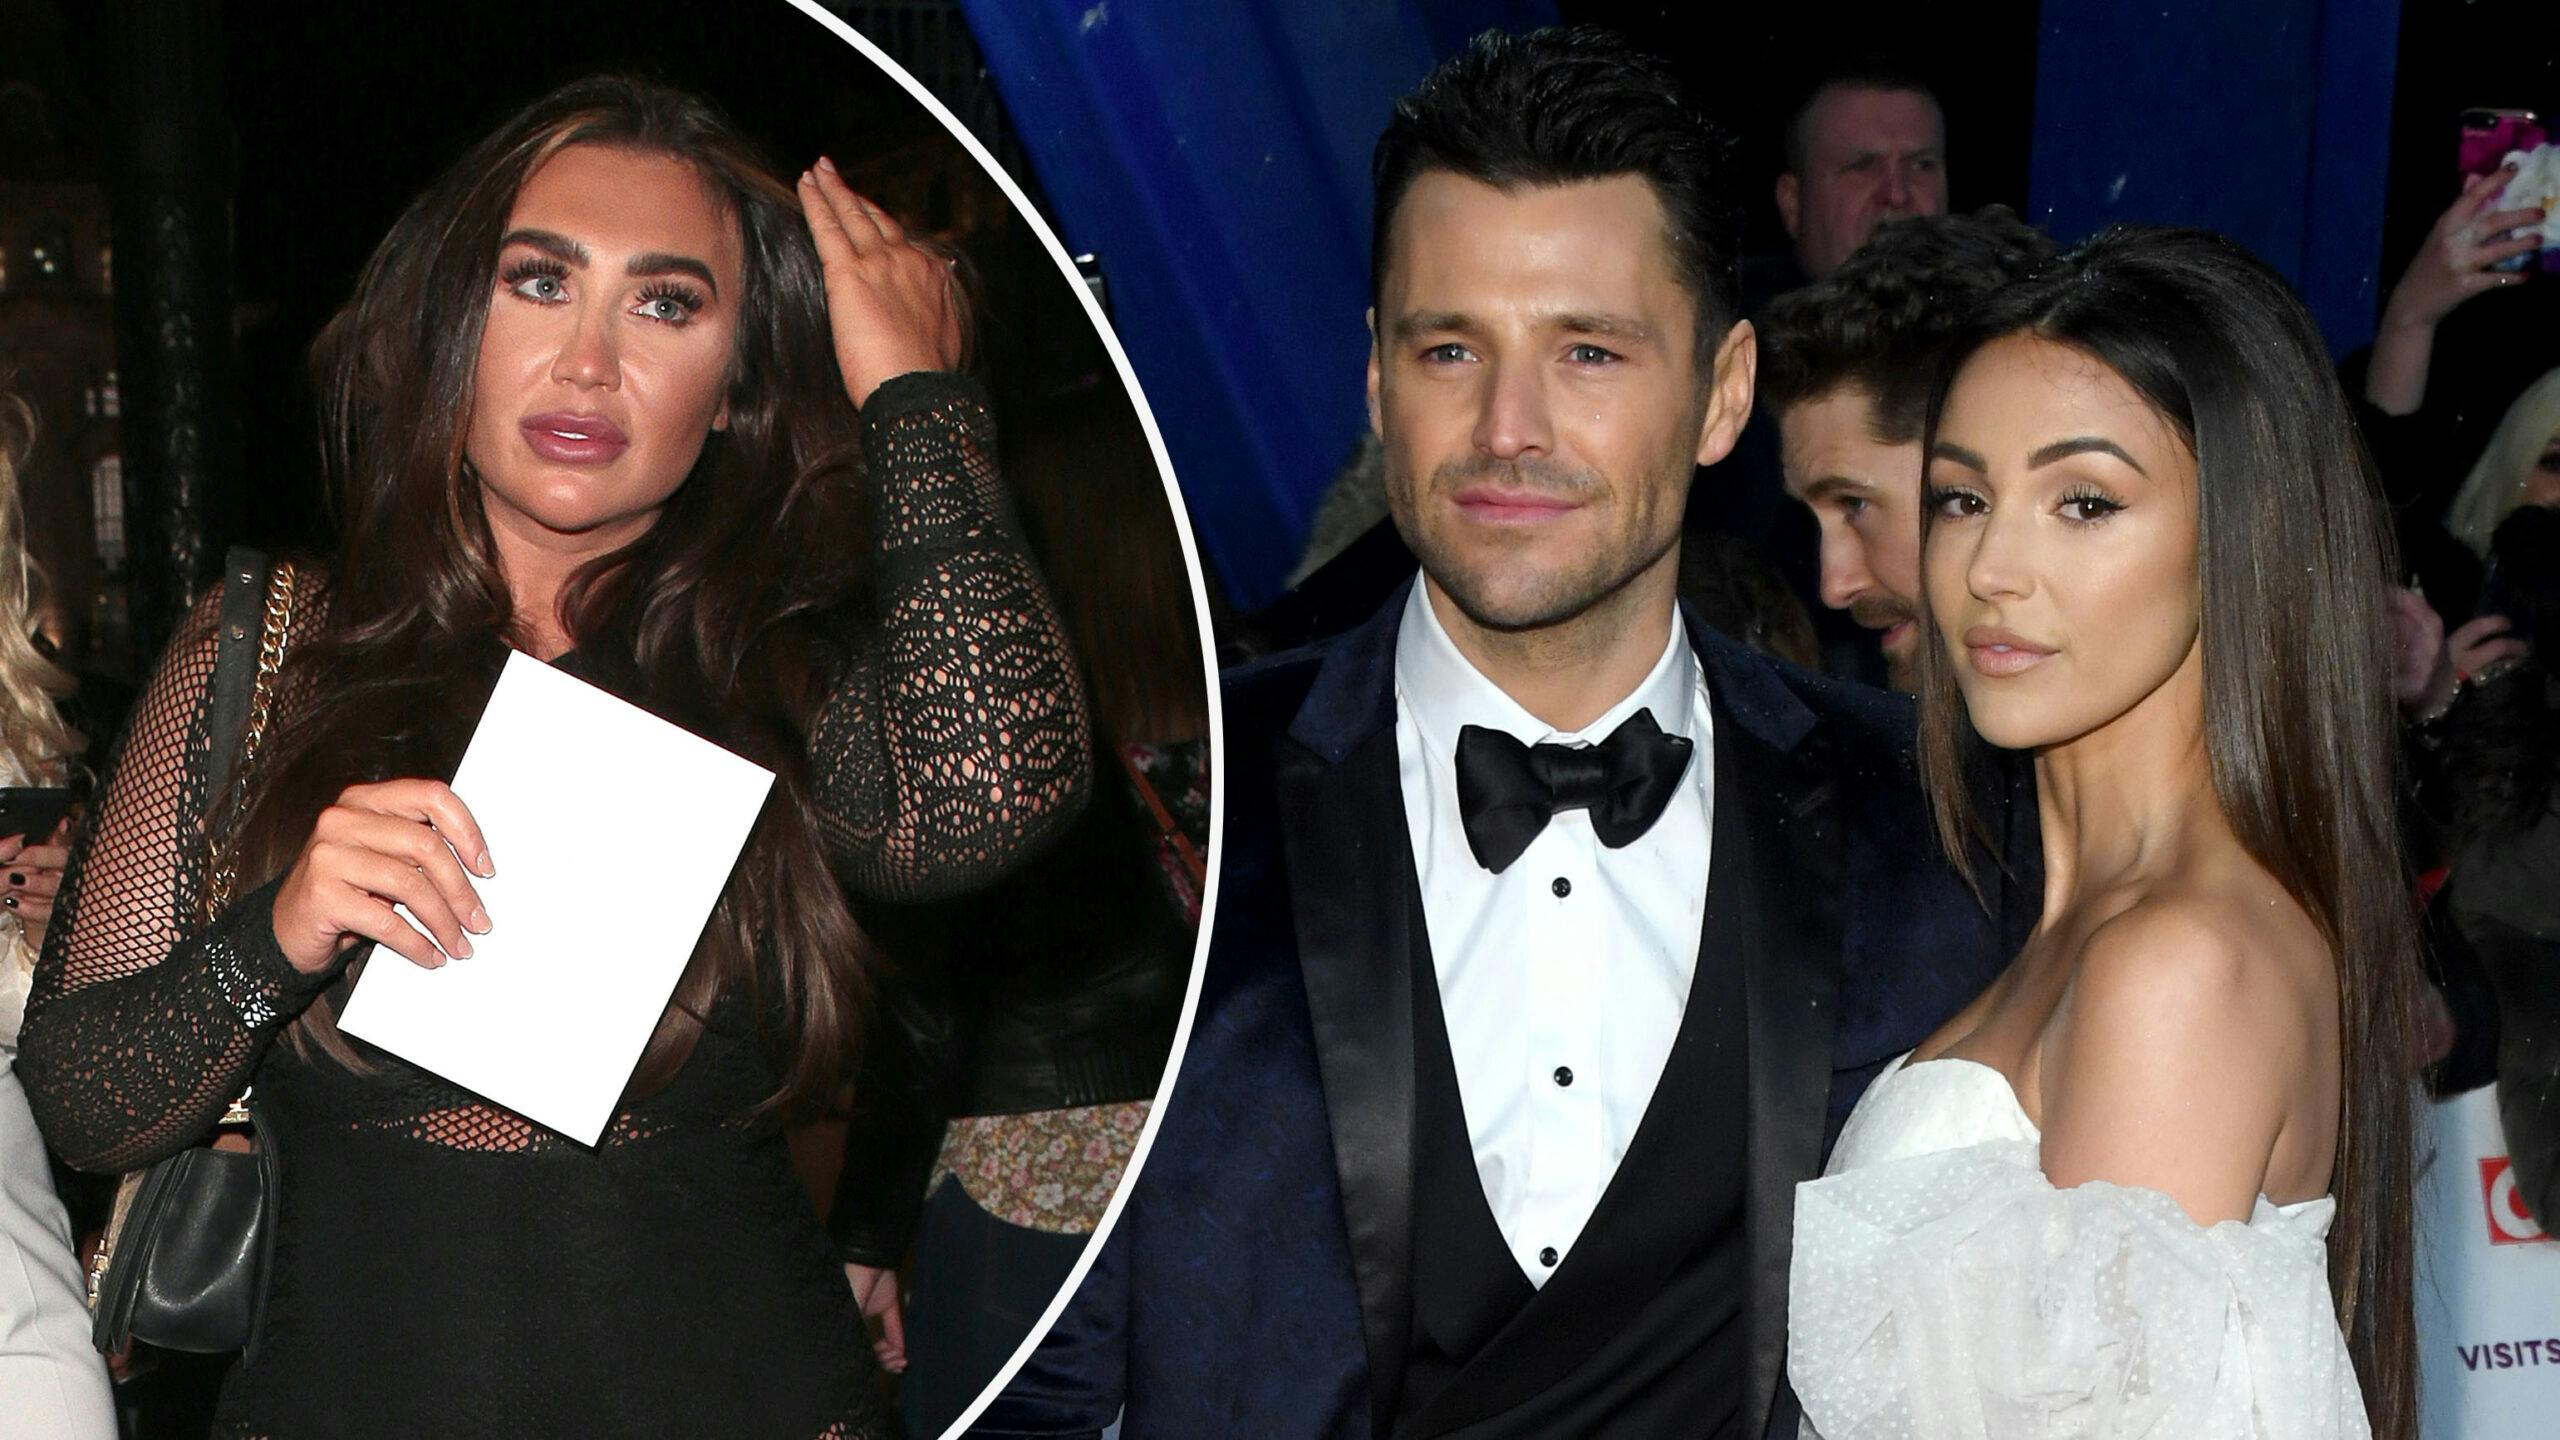 Lauren Goodger plots toxic tell-all on Mark Wright and Michelle Keegan Entertainment Closer pic